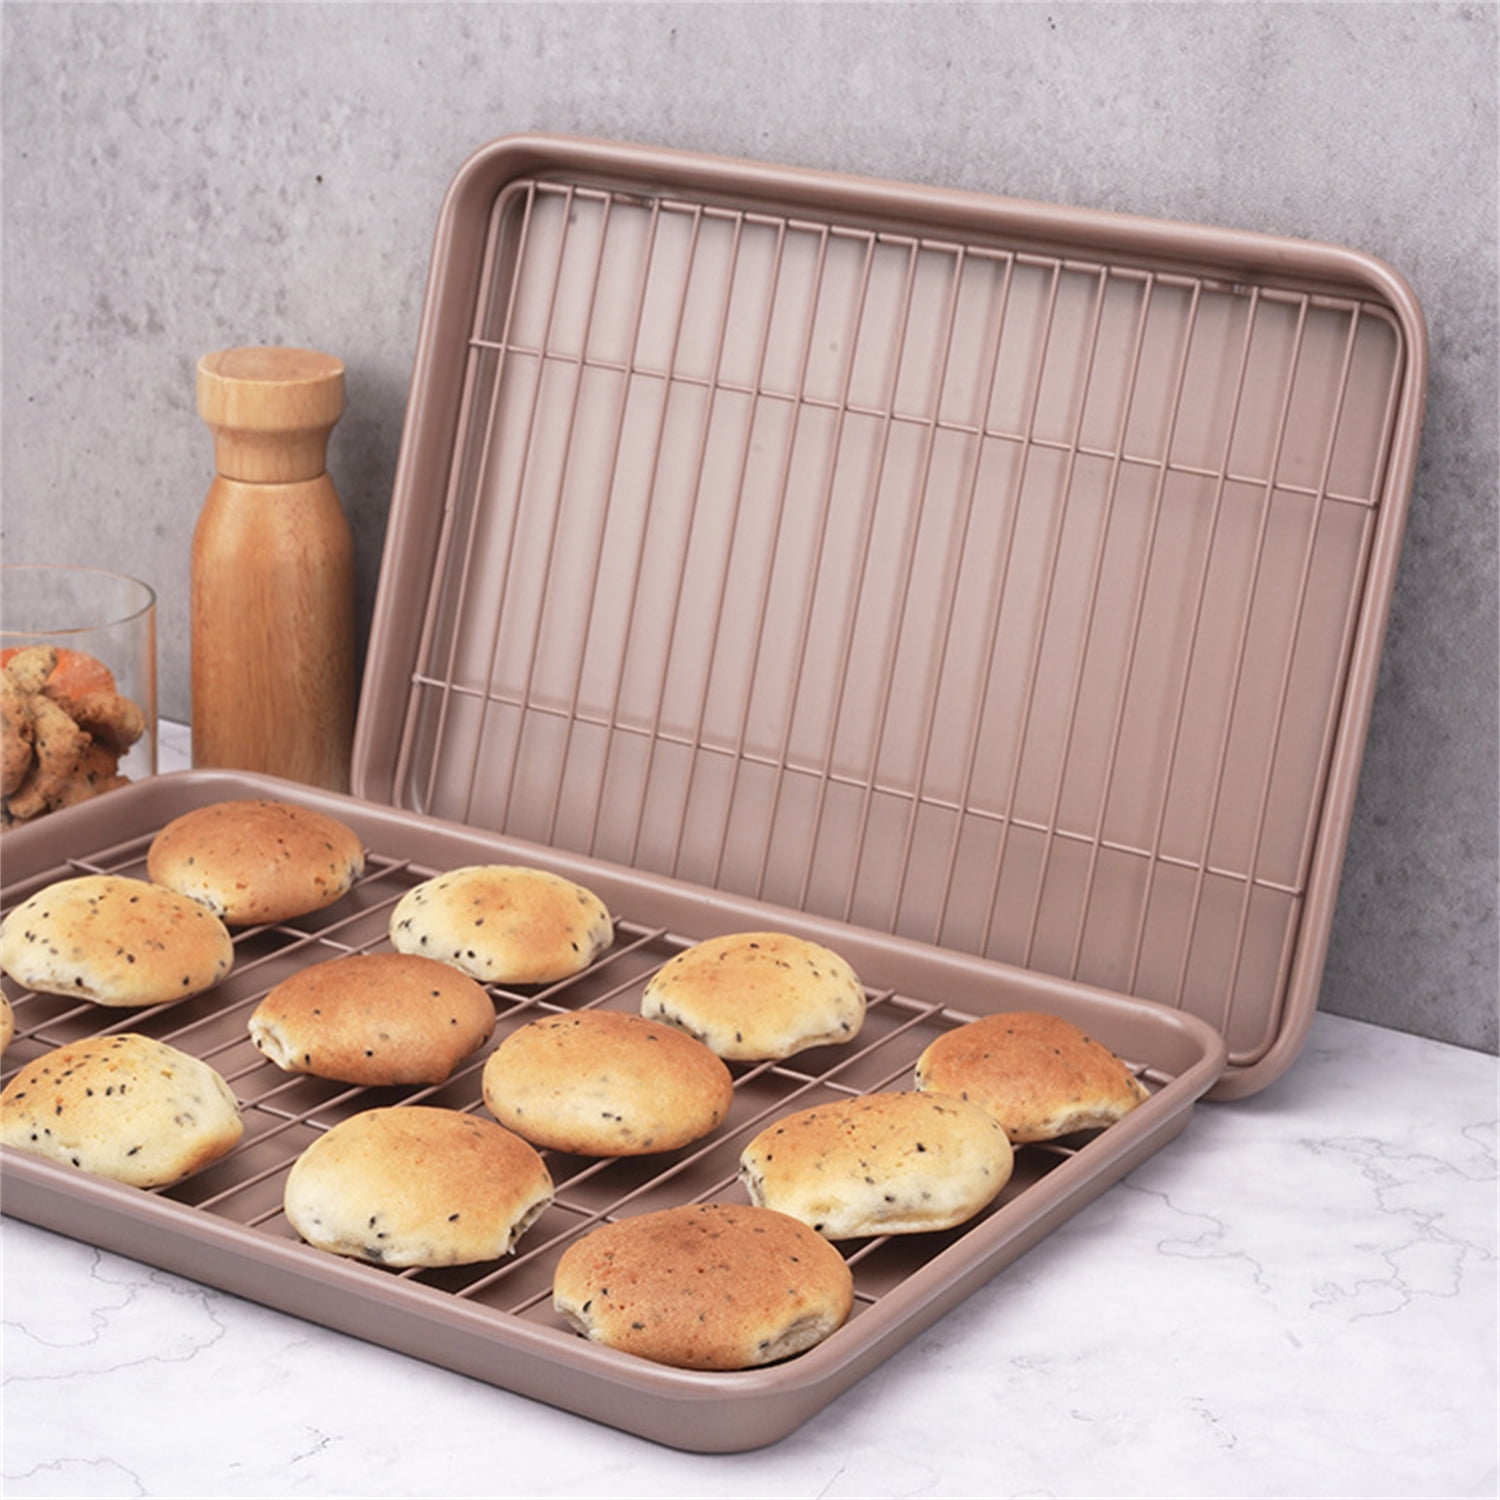 iplusmile 1 Set Cooling Rack Griddle Grill Grills Baking Tray with Wire  Rack Oven Pan with Rack Baking Rack for Oven Cooking Baking Tray for Oven